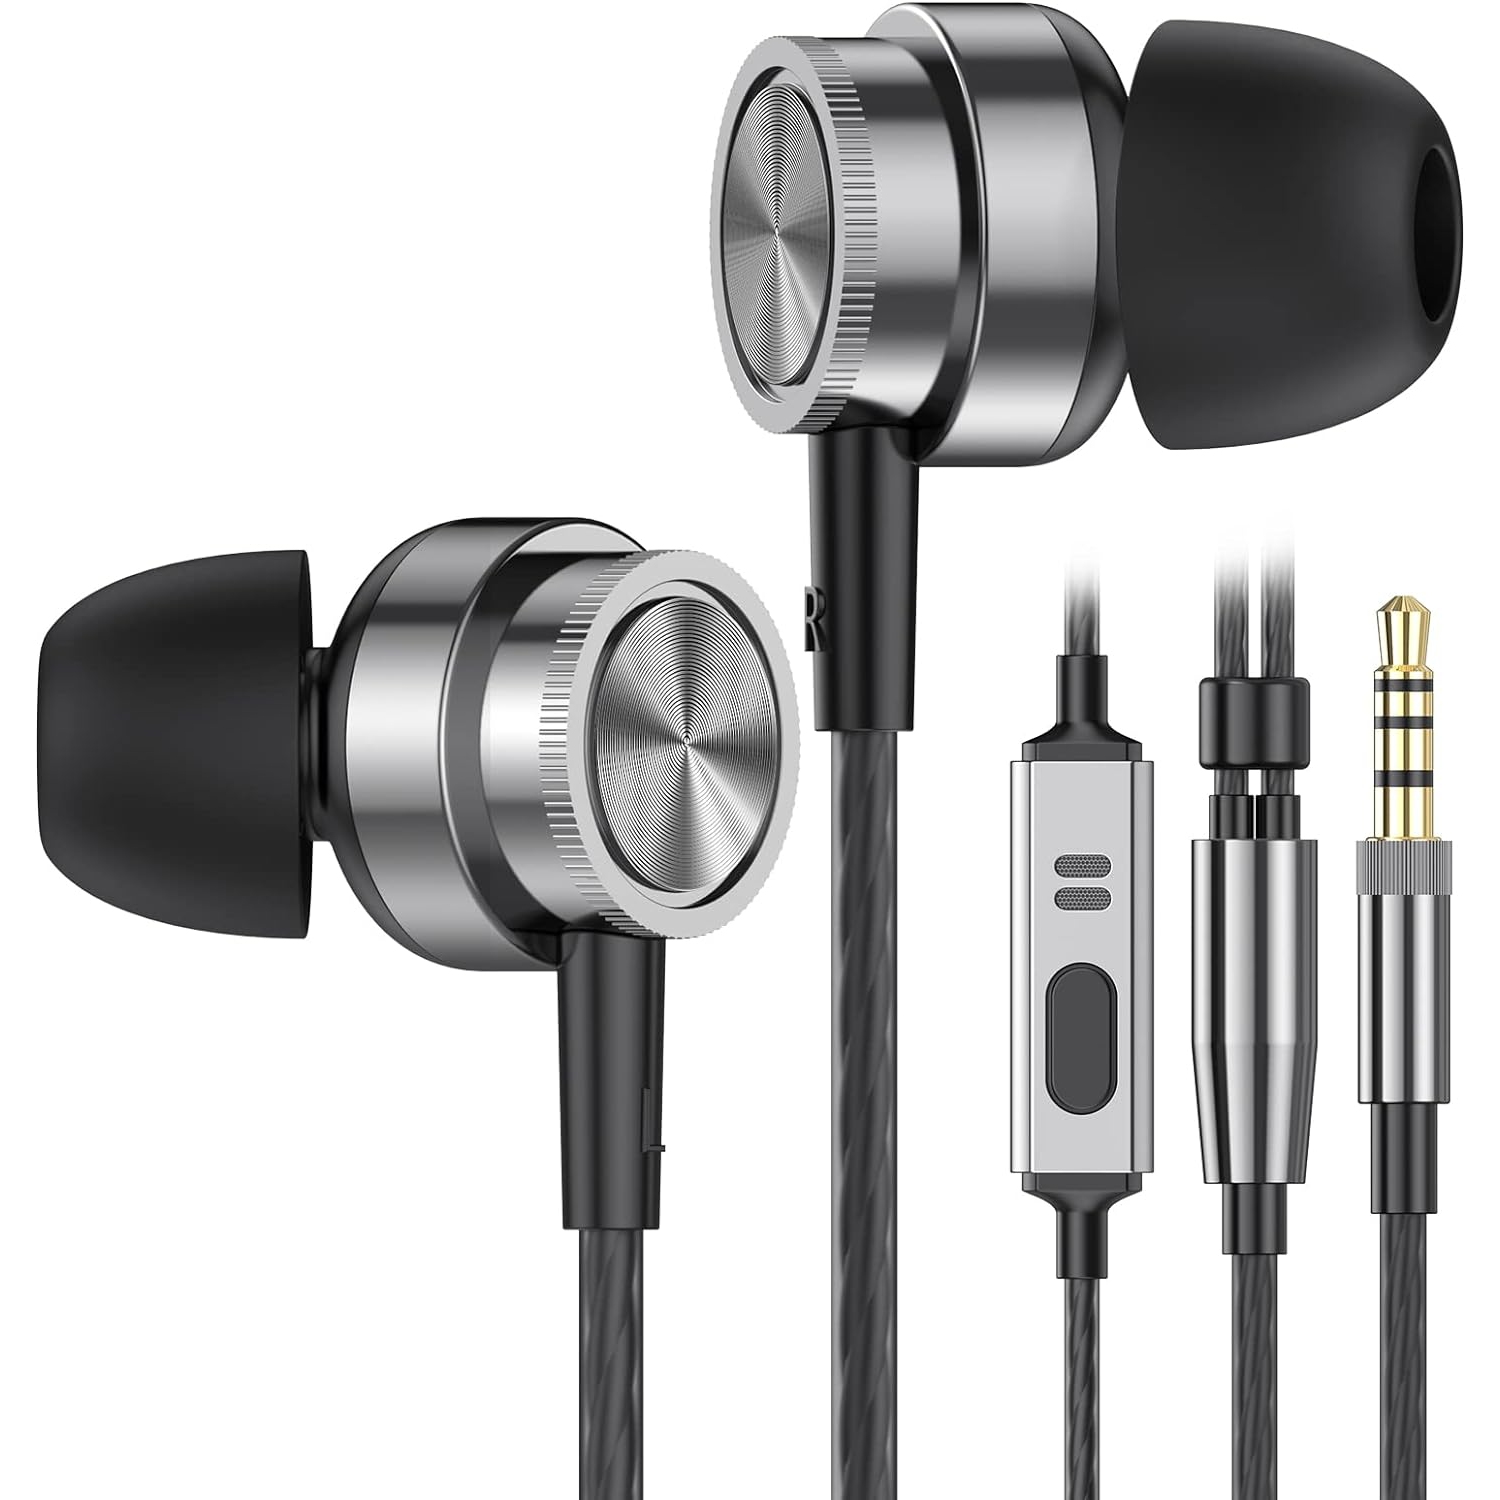 Wired Earbuds, in-Ear Headphones with Microphone, Earphones with HiFi Stereo, Noise Isolating, Lightweight Earbuds